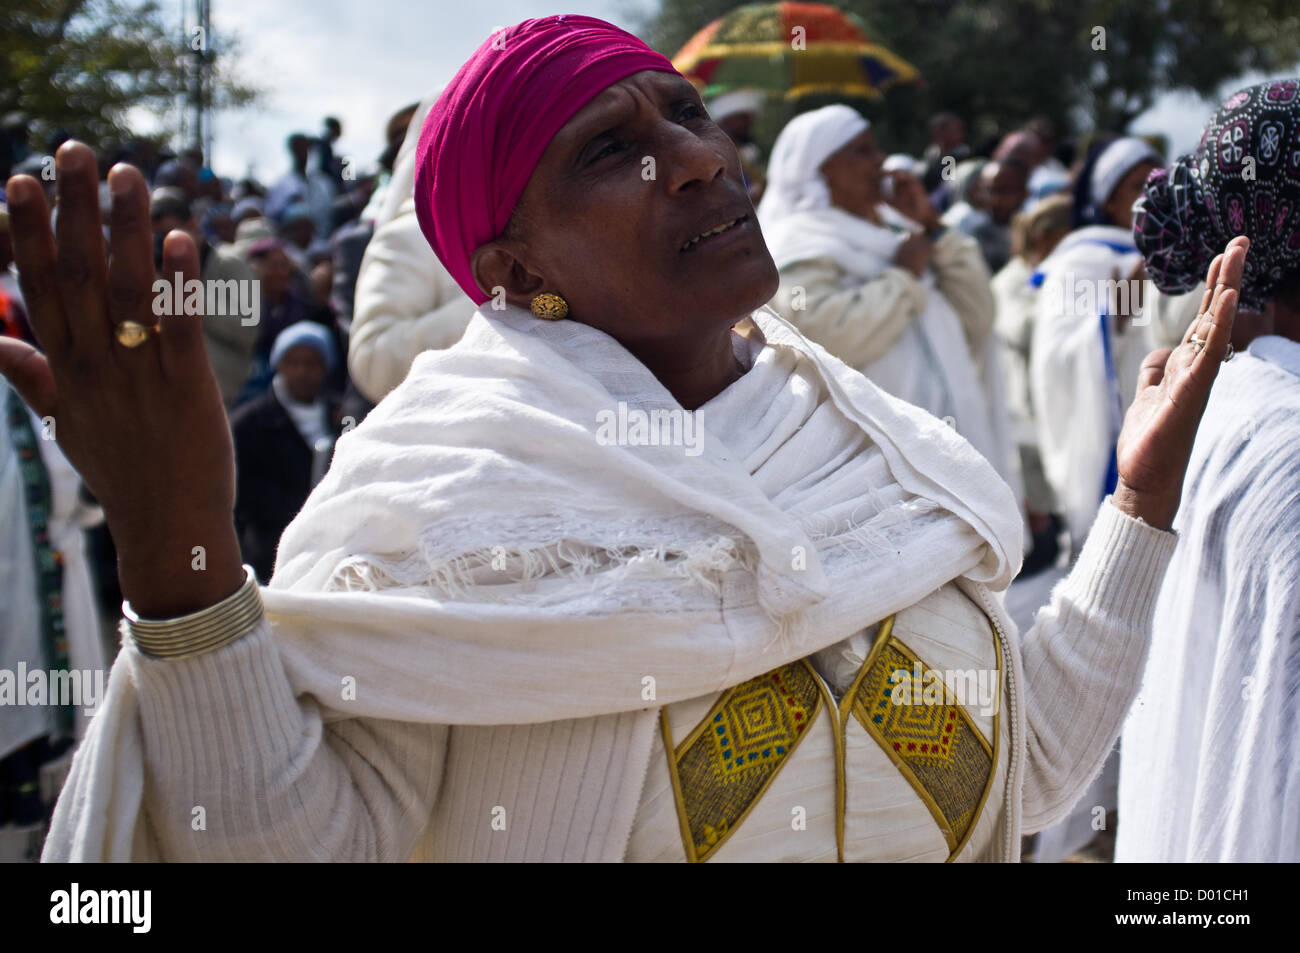 Jerusalem, Israel. 14th November 2012. Jewish Ethiopian woman wave their hands and bow in prayers of thanksgiving to God for delivering them to Israel. Jerusalem, Israel. 14-Nov-2012.   The Jewish Ethiopian community in Israel, Beta-Israel, celebrates the Sigd Holiday, symbolizing their yearning for Jerusalem for thousands of years, at the Sherover Promenade overlooking the Temple Mount. Credit:  Nir Alon / Alamy Live News Stock Photo